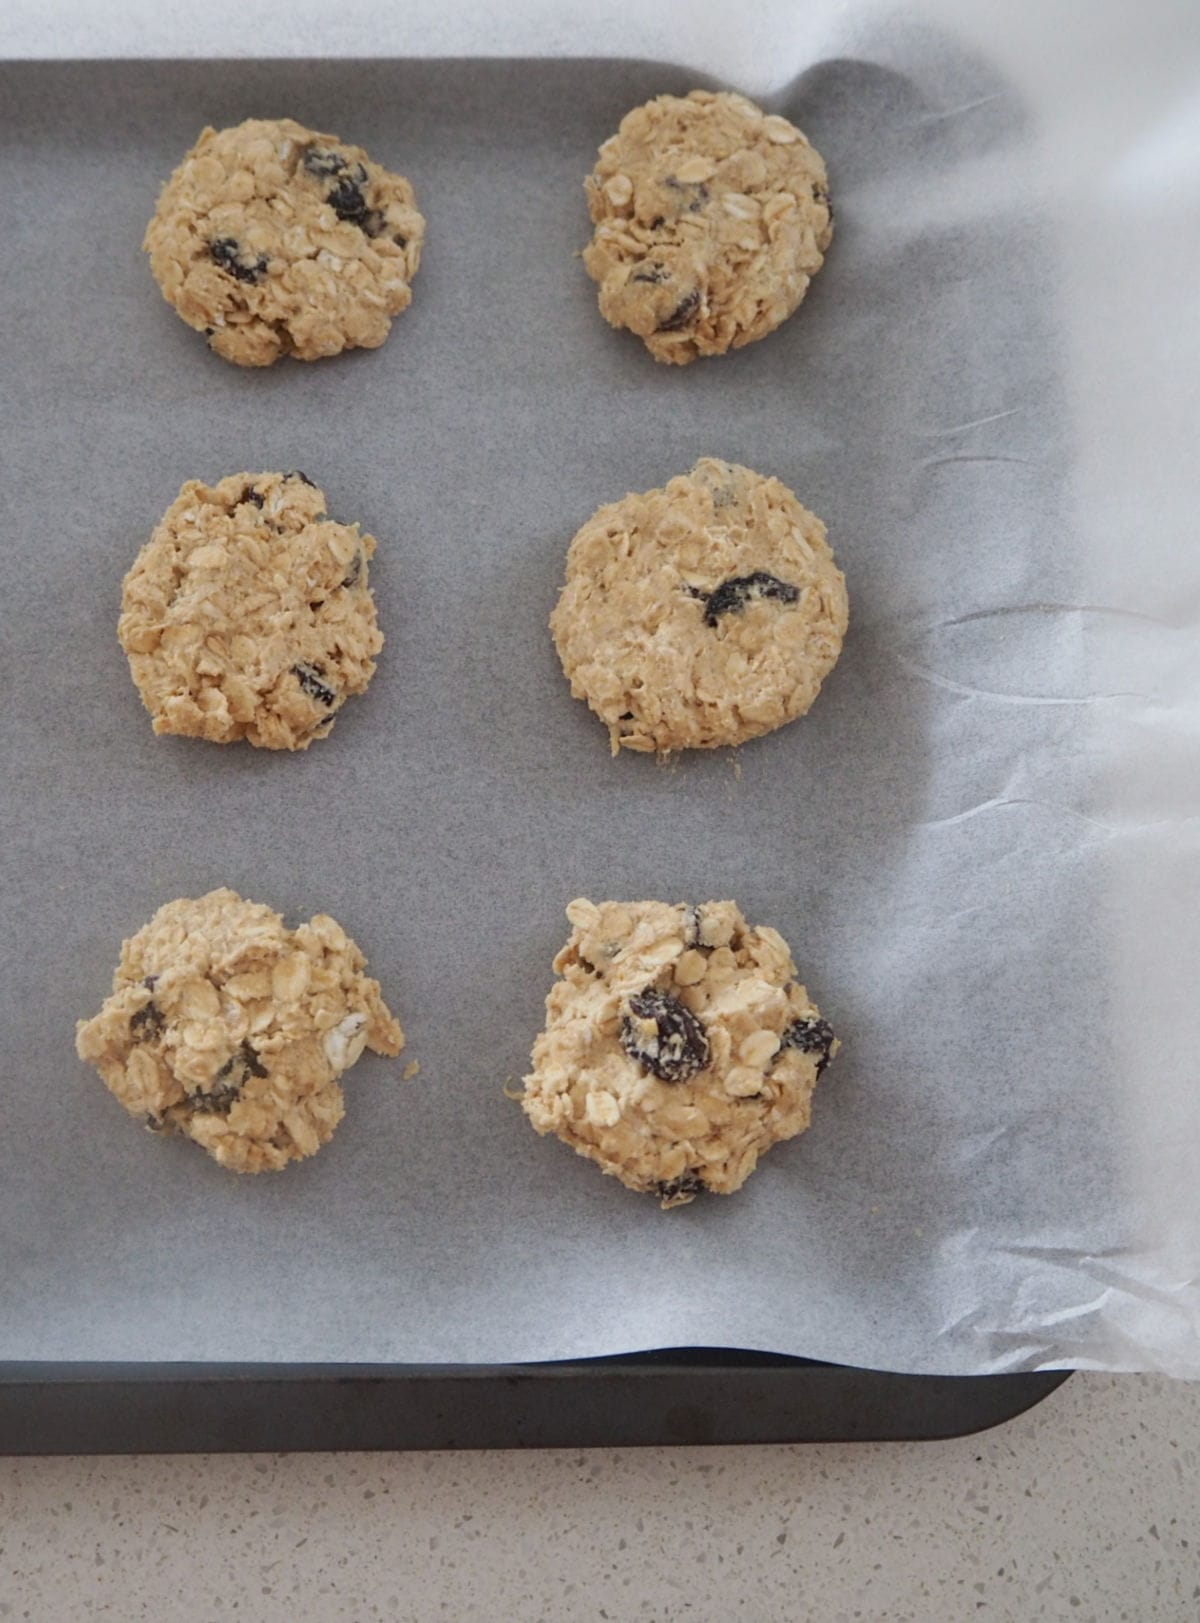 Oat and Raisin Cookie Dough on a baking tray.